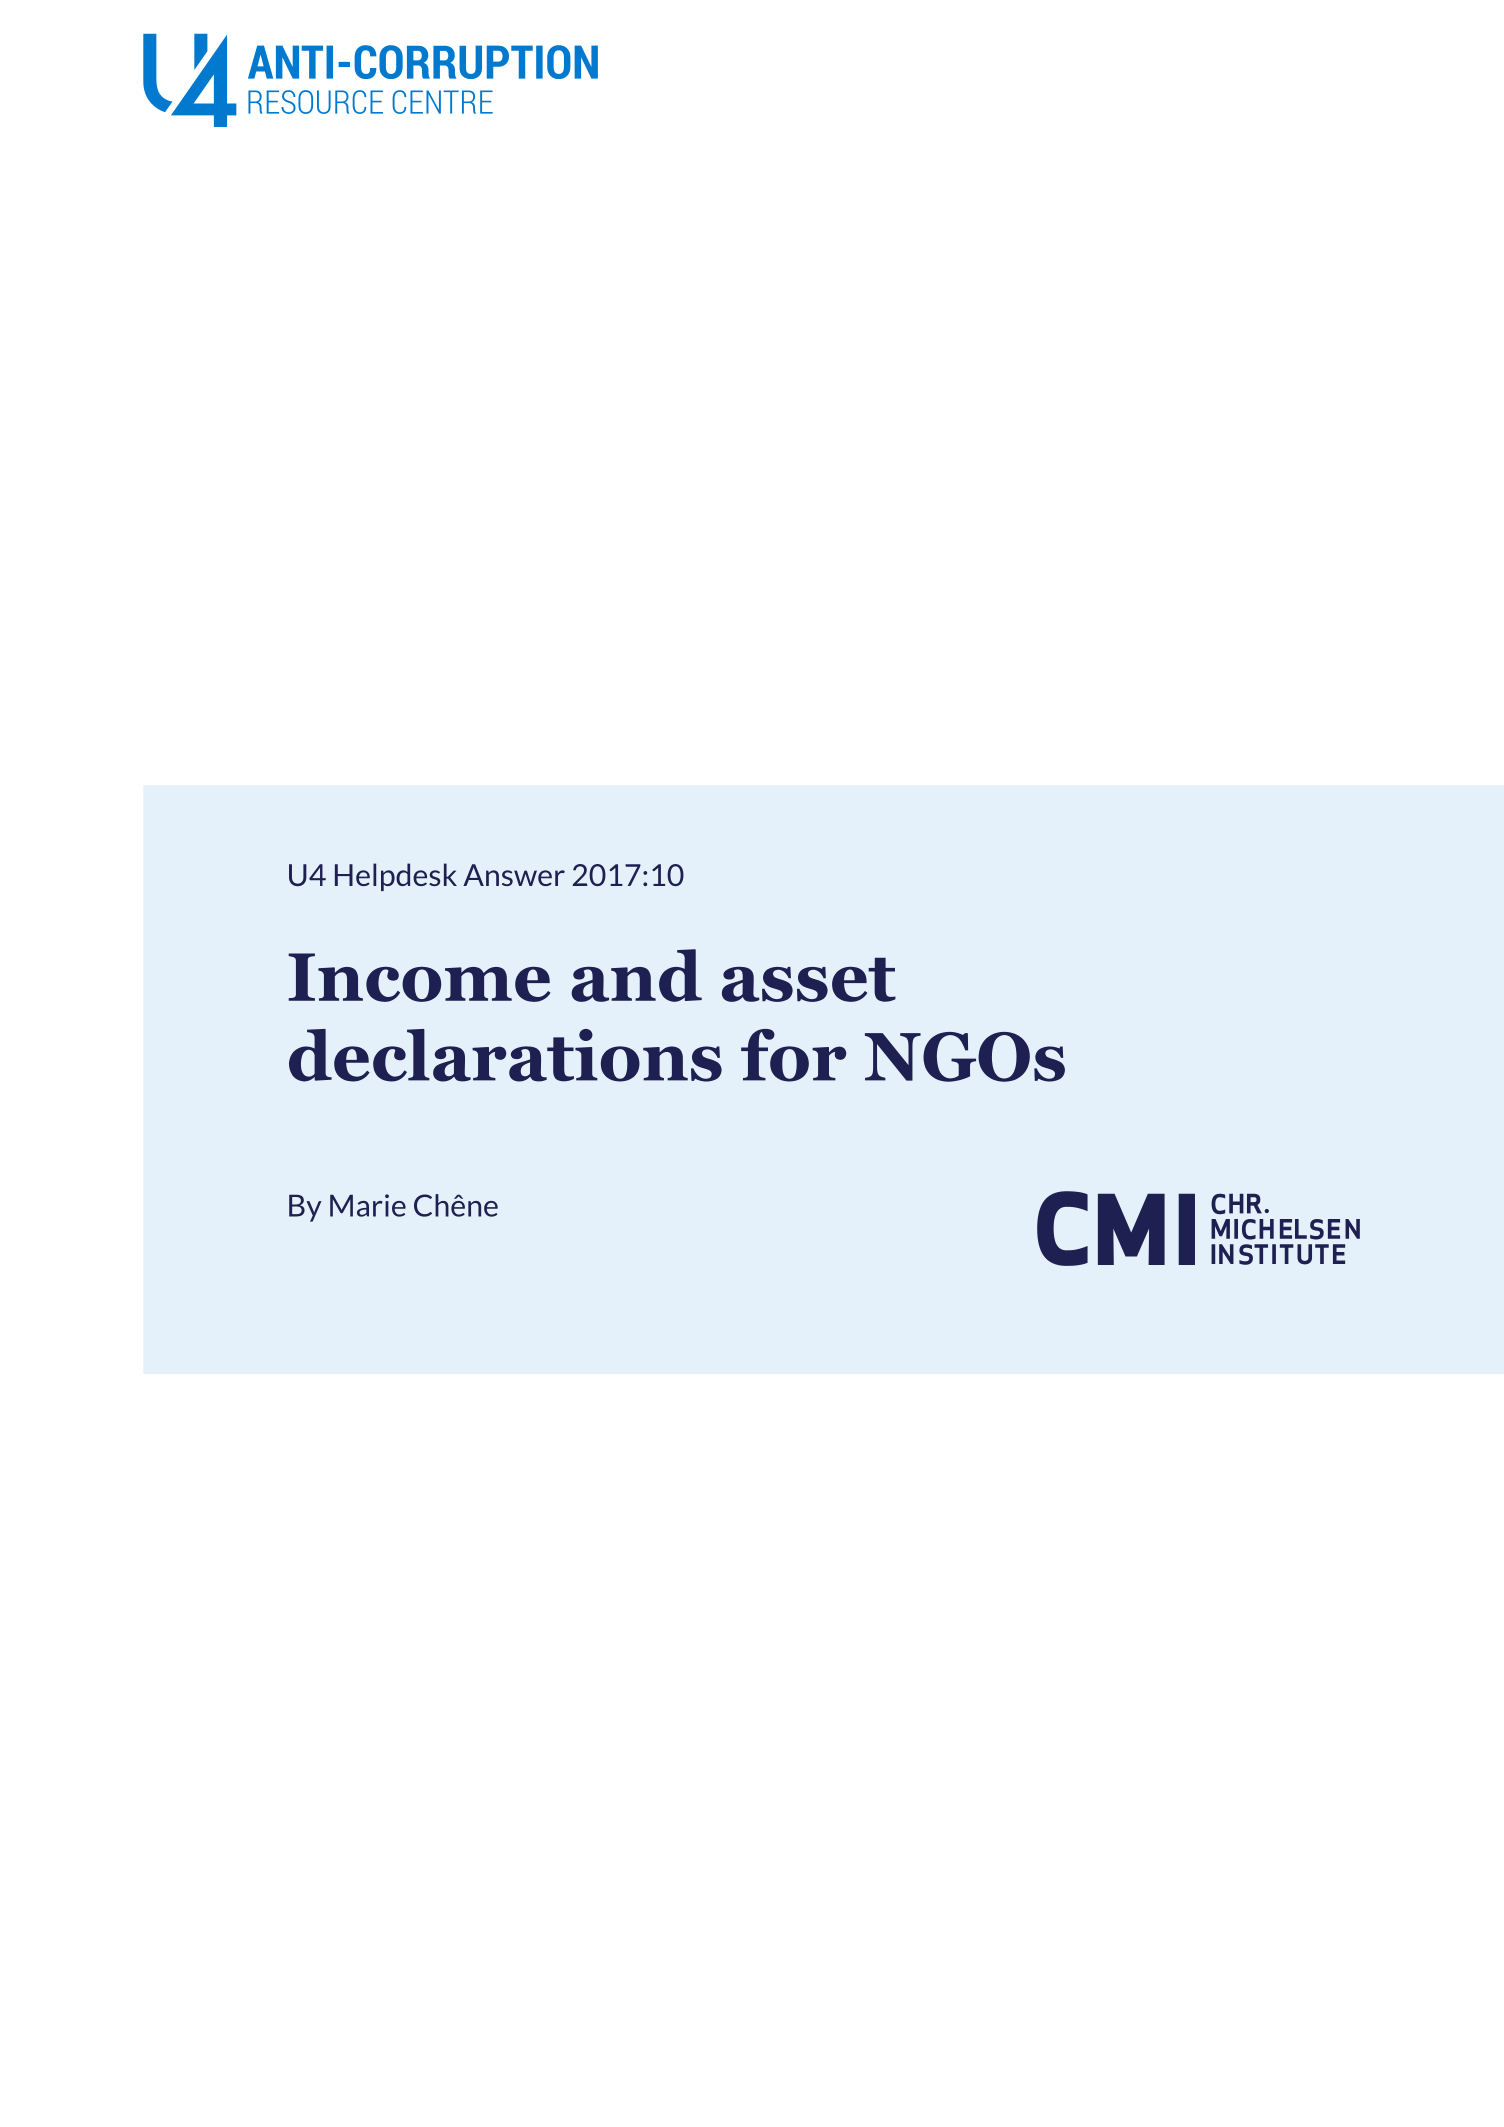 Income and asset declarations for NGOs